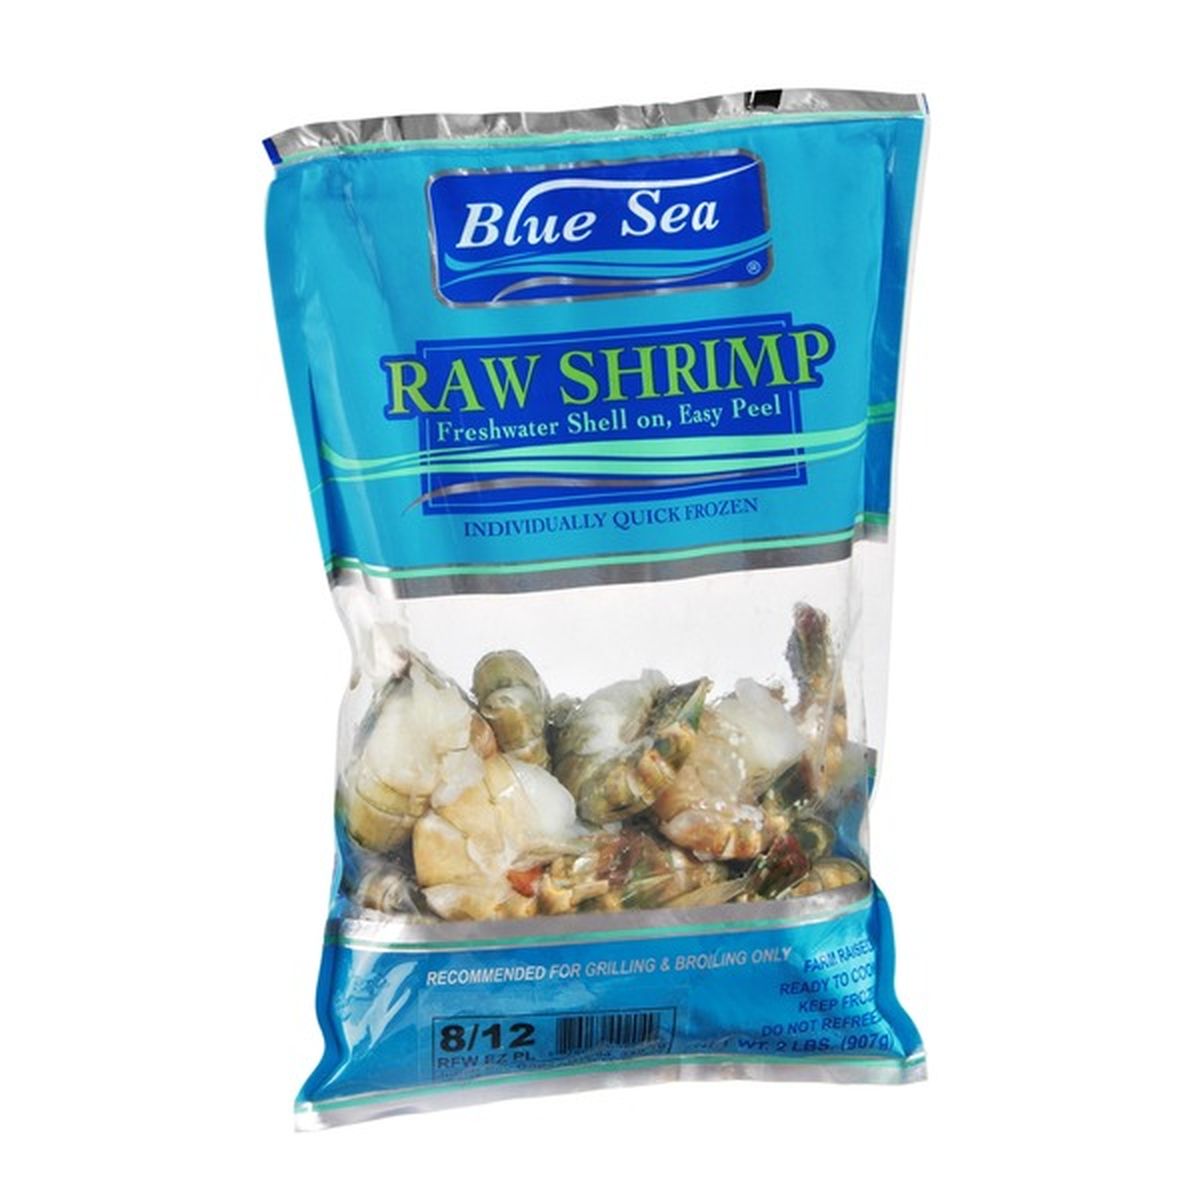 Blue Sea Freshwater Shell On Raw Shrimp (2 lb) Delivery or Pickup